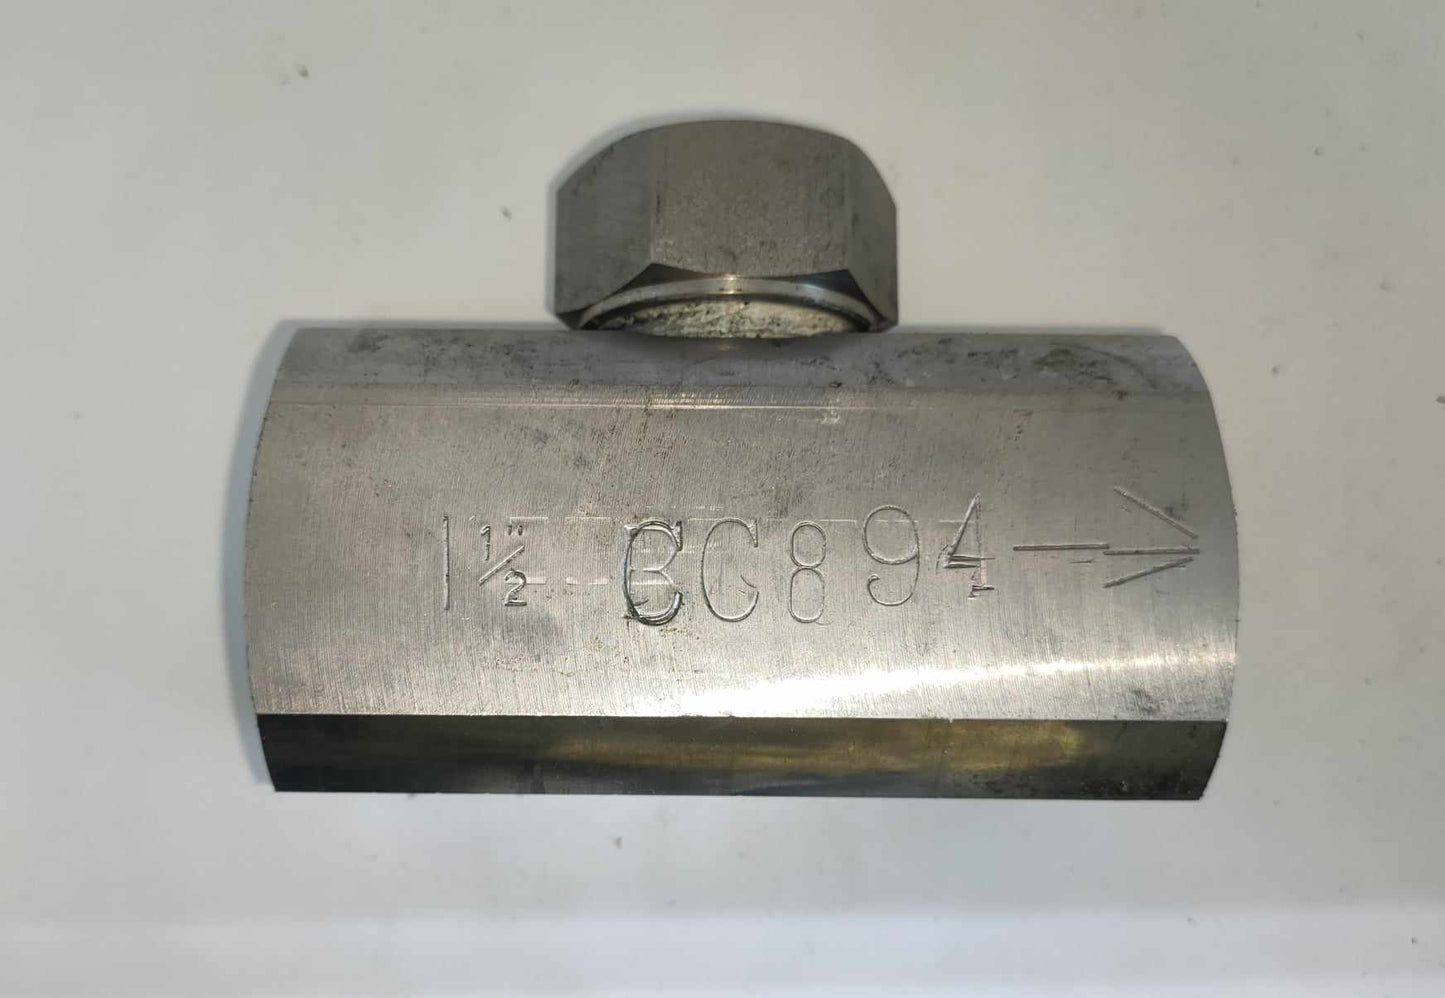 Ball Check Valve - Stainless Steel - Screwed BSPT - CC894 - 40mm